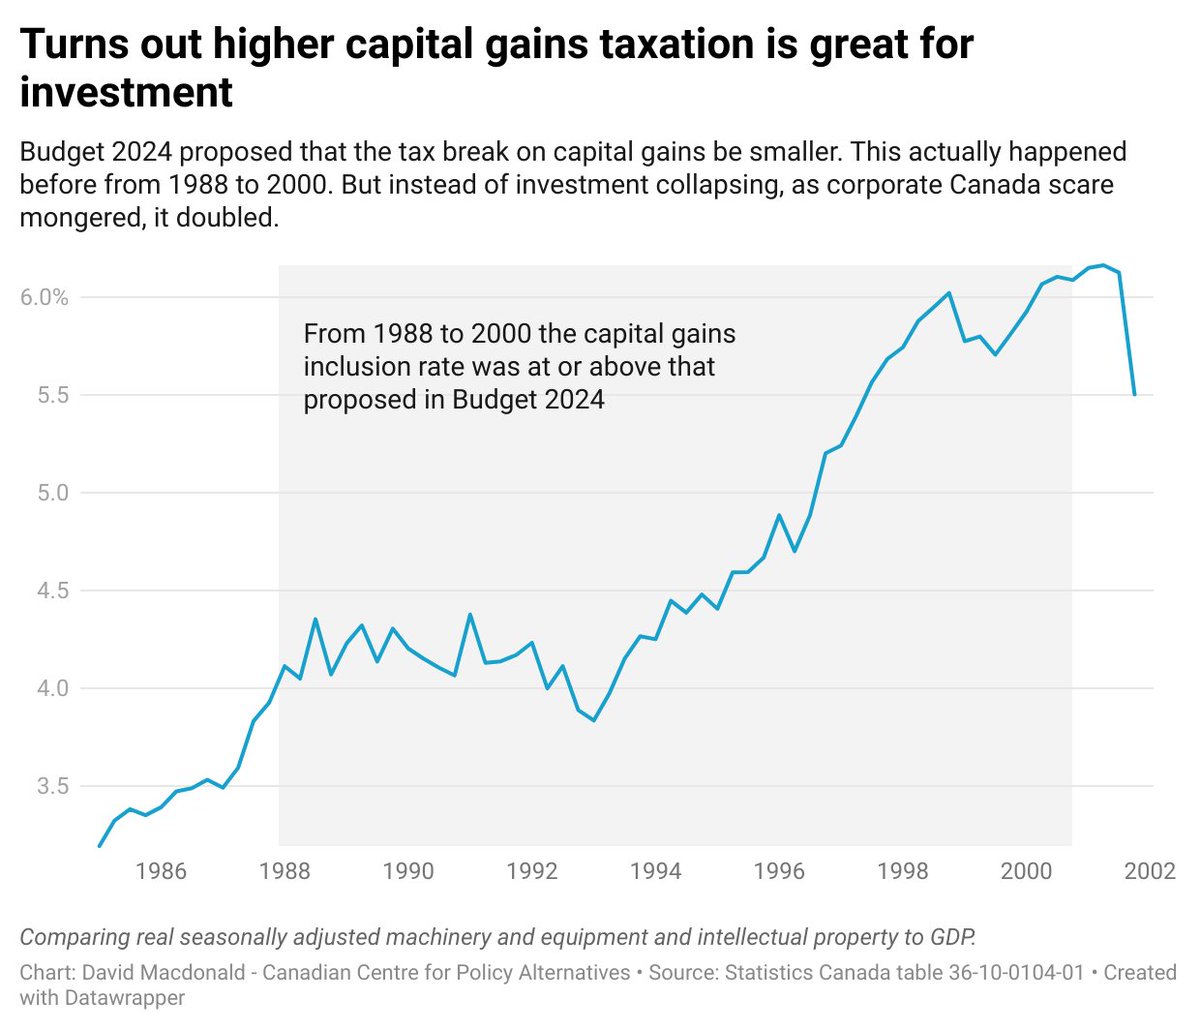 Corp Canada threatened to pull their investments b/c their cap gains tax break shrank in #Budget2024. But Mulroney did the same thing in 1988 and shrank it further in 1990. In 2000, the inclusion rate went back to pre-1988. Did corp invt plummet? Nope... it skyrocketed 1/n @ccpa